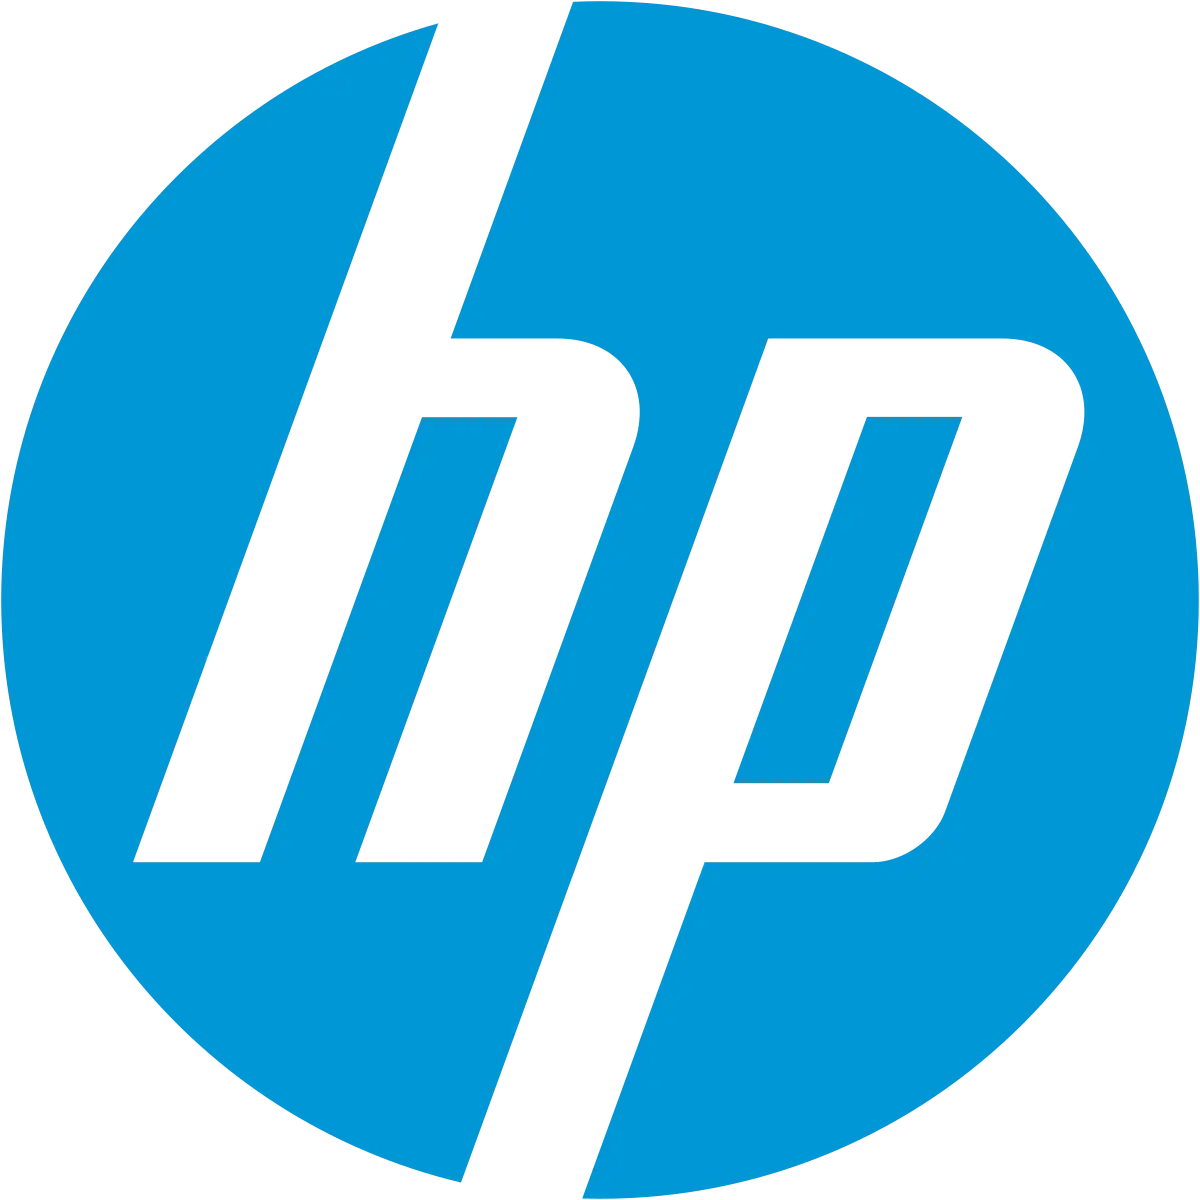 Hewlett packard companies: comprehensive overview of hp inc. and hpe